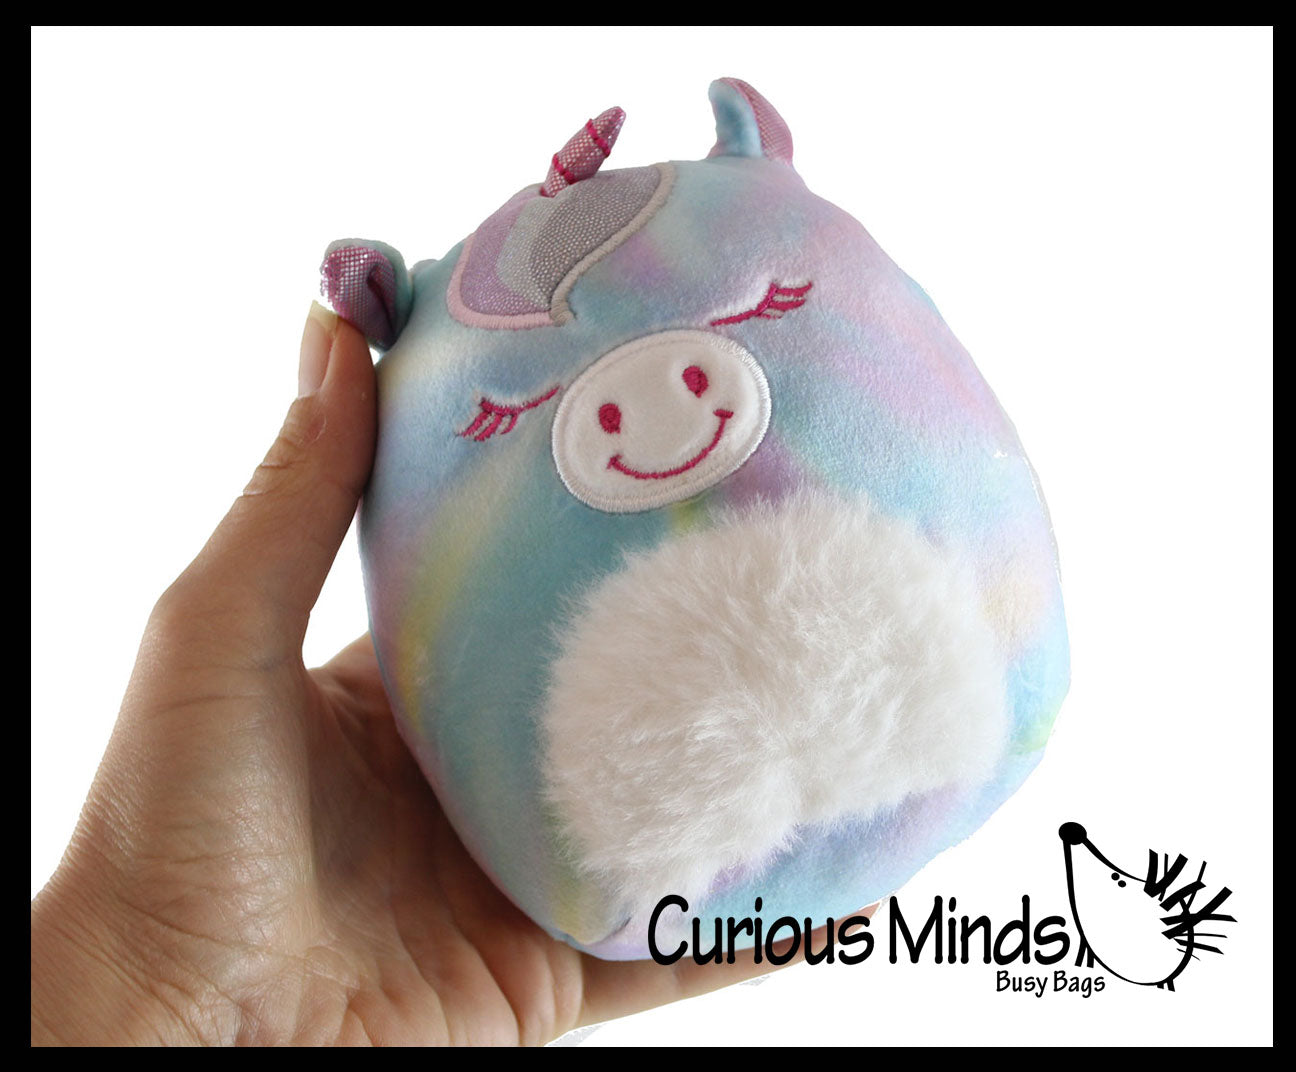 Squishmallow 5 Inch Disney Scented Squad Mystery Bag - Owl & Goose Gifts